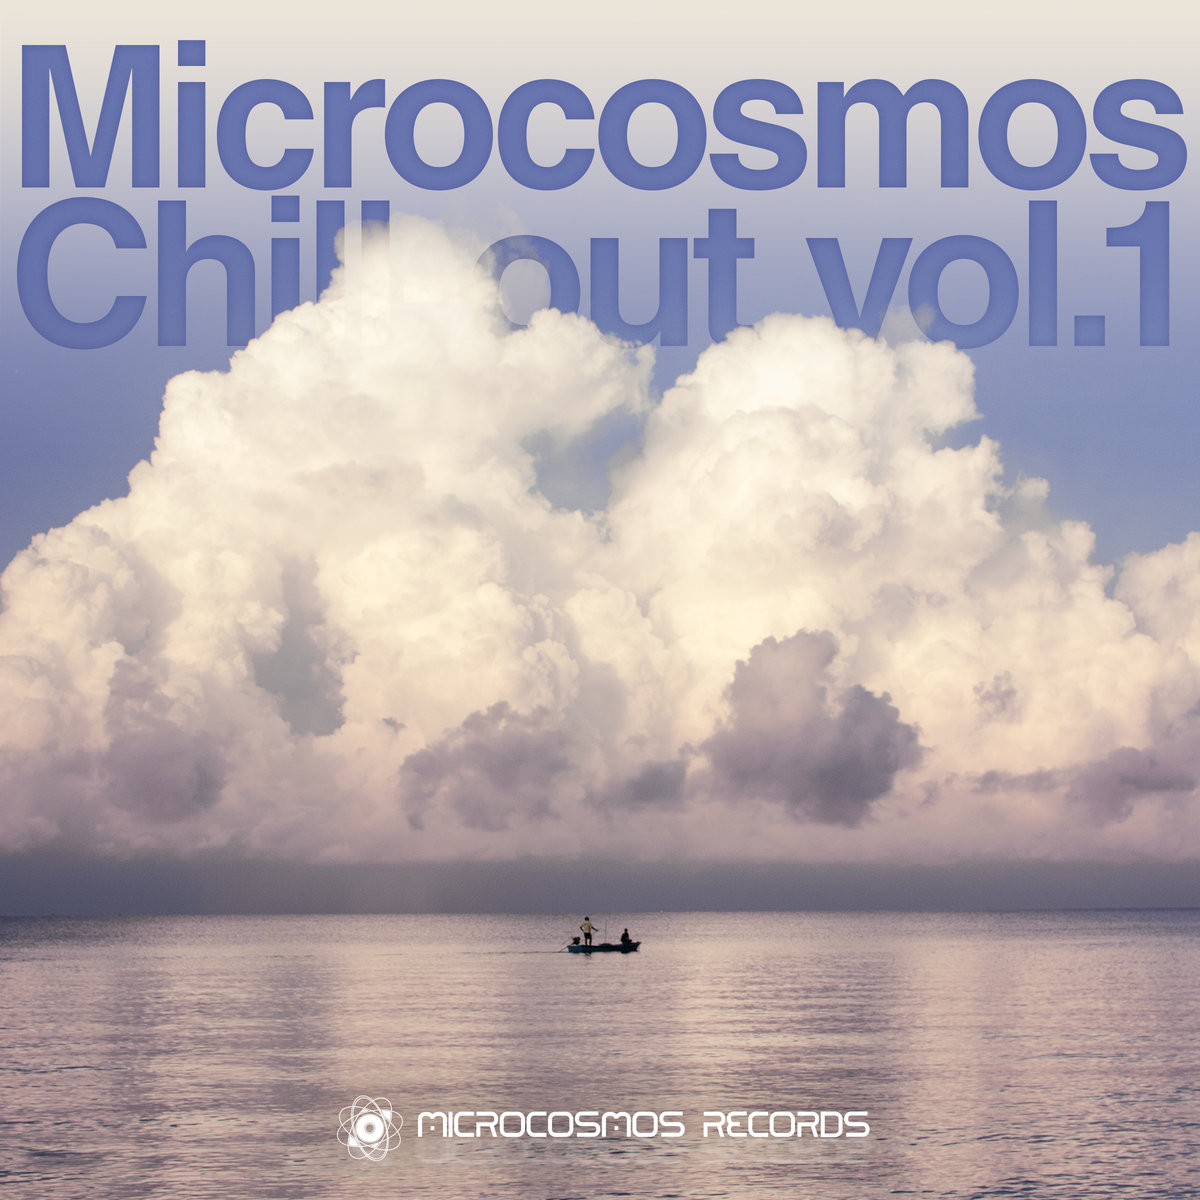 Cosmic Replicant - The Fire From Within @ 'Various Artists - Microcosmos Chill-out Vol.1' album (ambient, chill-out)